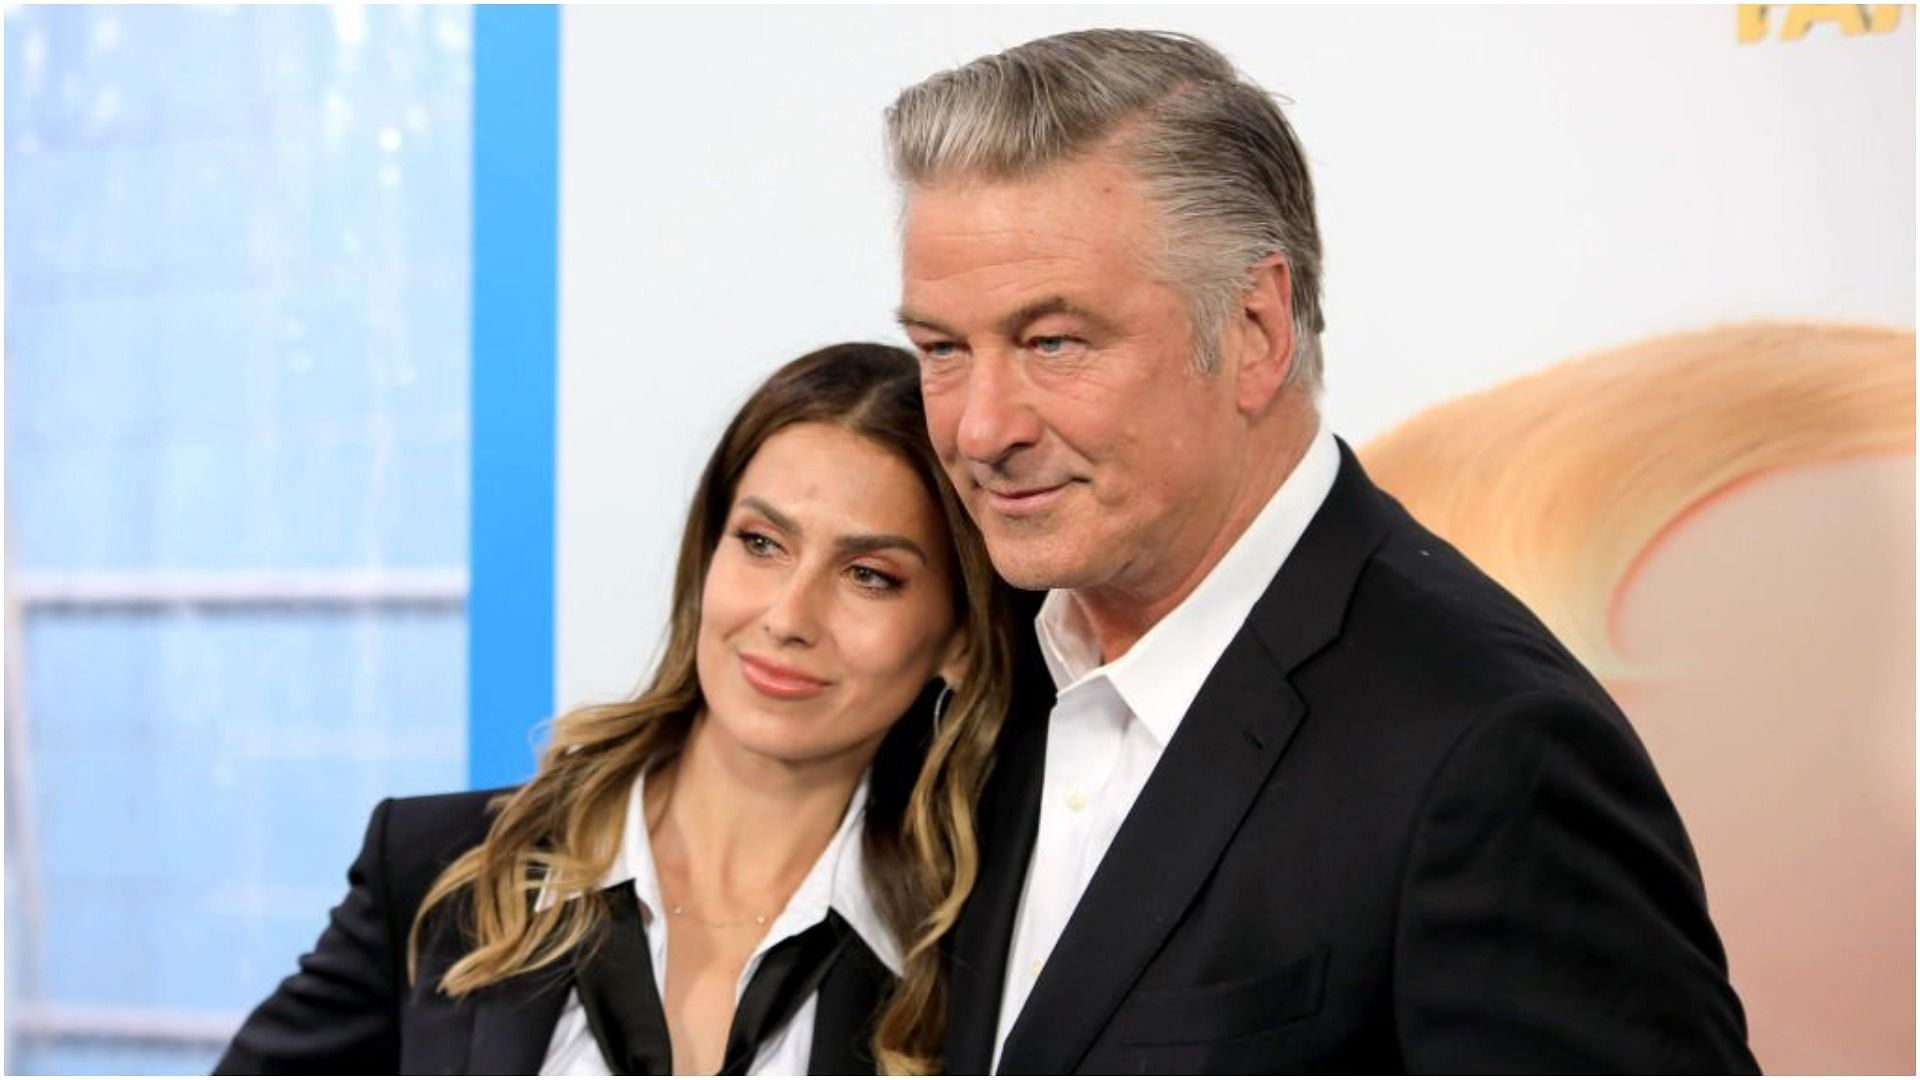 How Old Is Alec Baldwin And His Wife Hilaria Baldwin Age Difference Explored As Couple Set To Welcome 7th Child Together